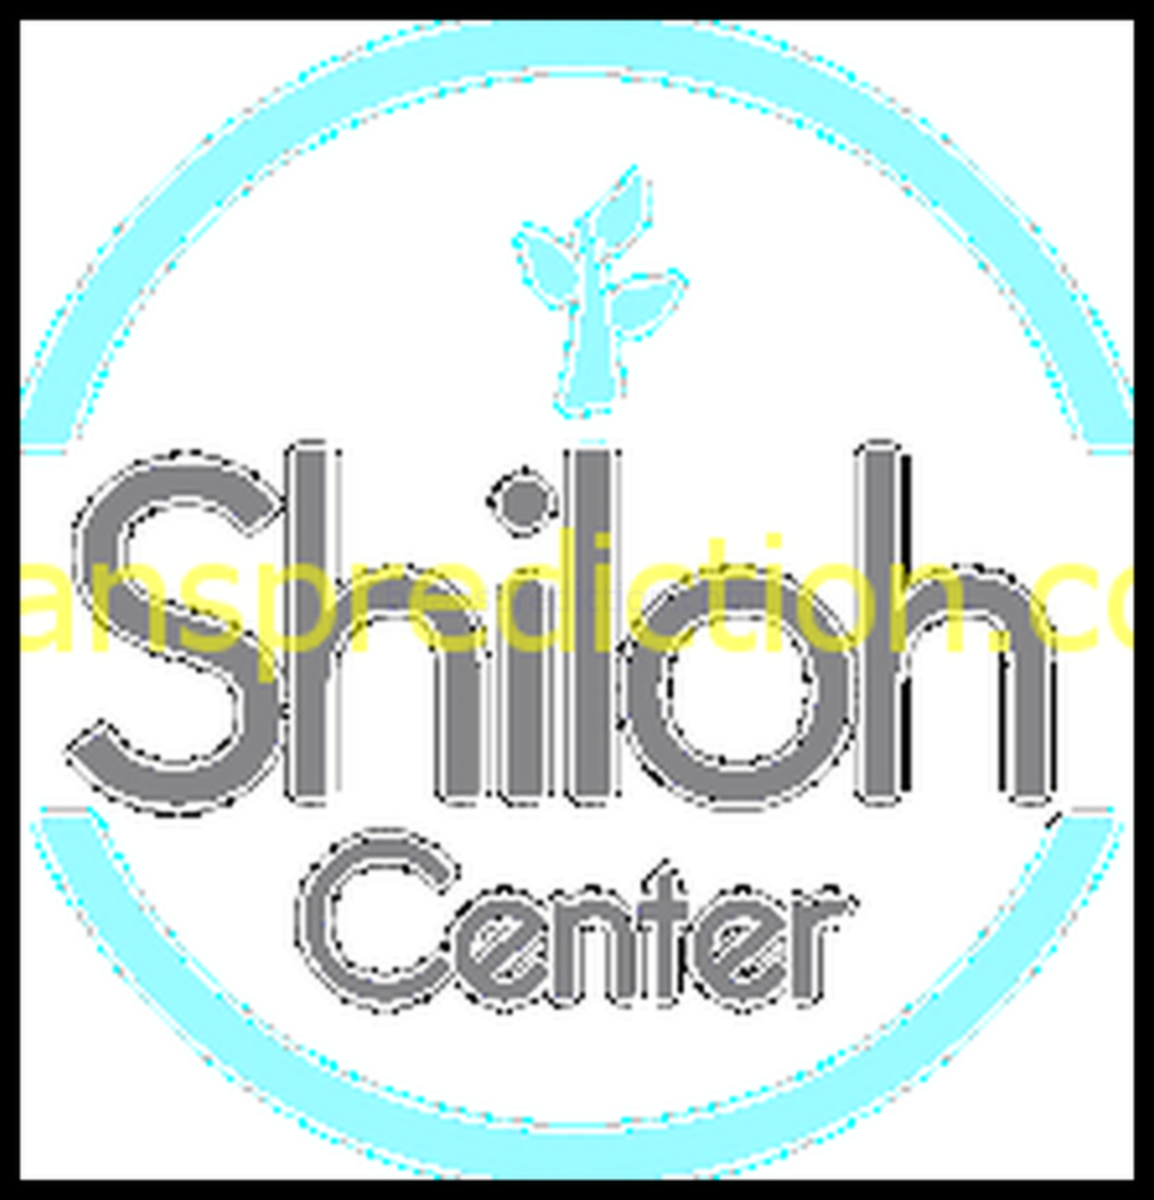 Shiloh Residential Treatment Center in Manvel Texas 1eff674a-51a7-4629-8786-a4b634d67c1e drugging kids deaths psychic ladd
Shiloh Residential Treatment Center in Manvel Texas 1eff674a-51a7-4629-8786-a4b634d67c1e drugging kids deaths psychic ladd
